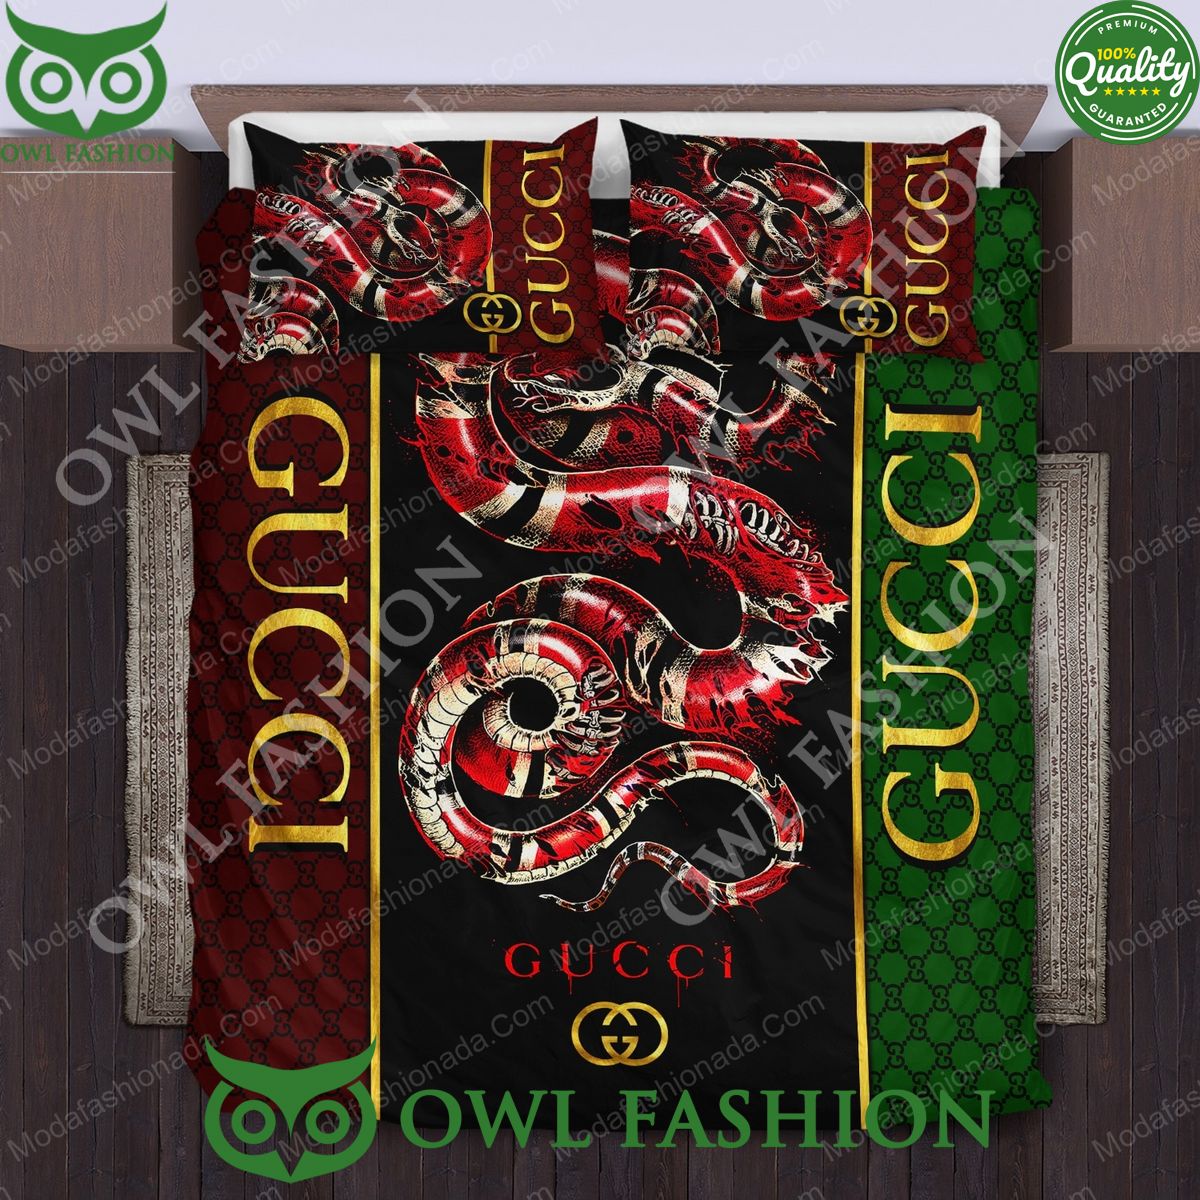 Gucci Snake Bedding Sets Natural and awesome